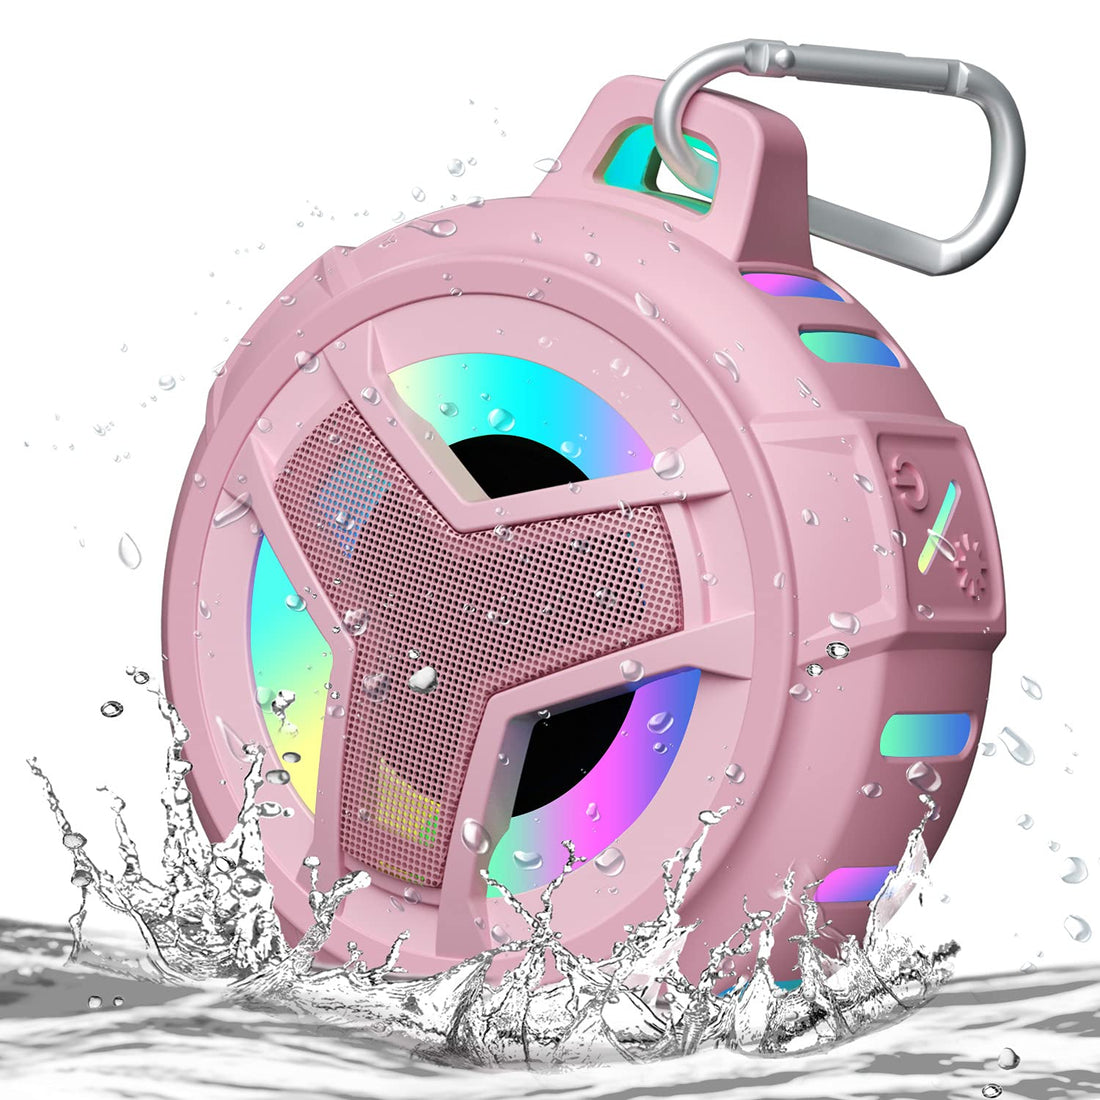 EBODA Bluetooth Shower Speaker, IPX7 Waterproof Portable Wireless Small Mini Speakers, Floating, 2000 mAh with RGB Light for Pool, Beach, Boat, Kayak Accessories, Gifts for Men and women -Orange